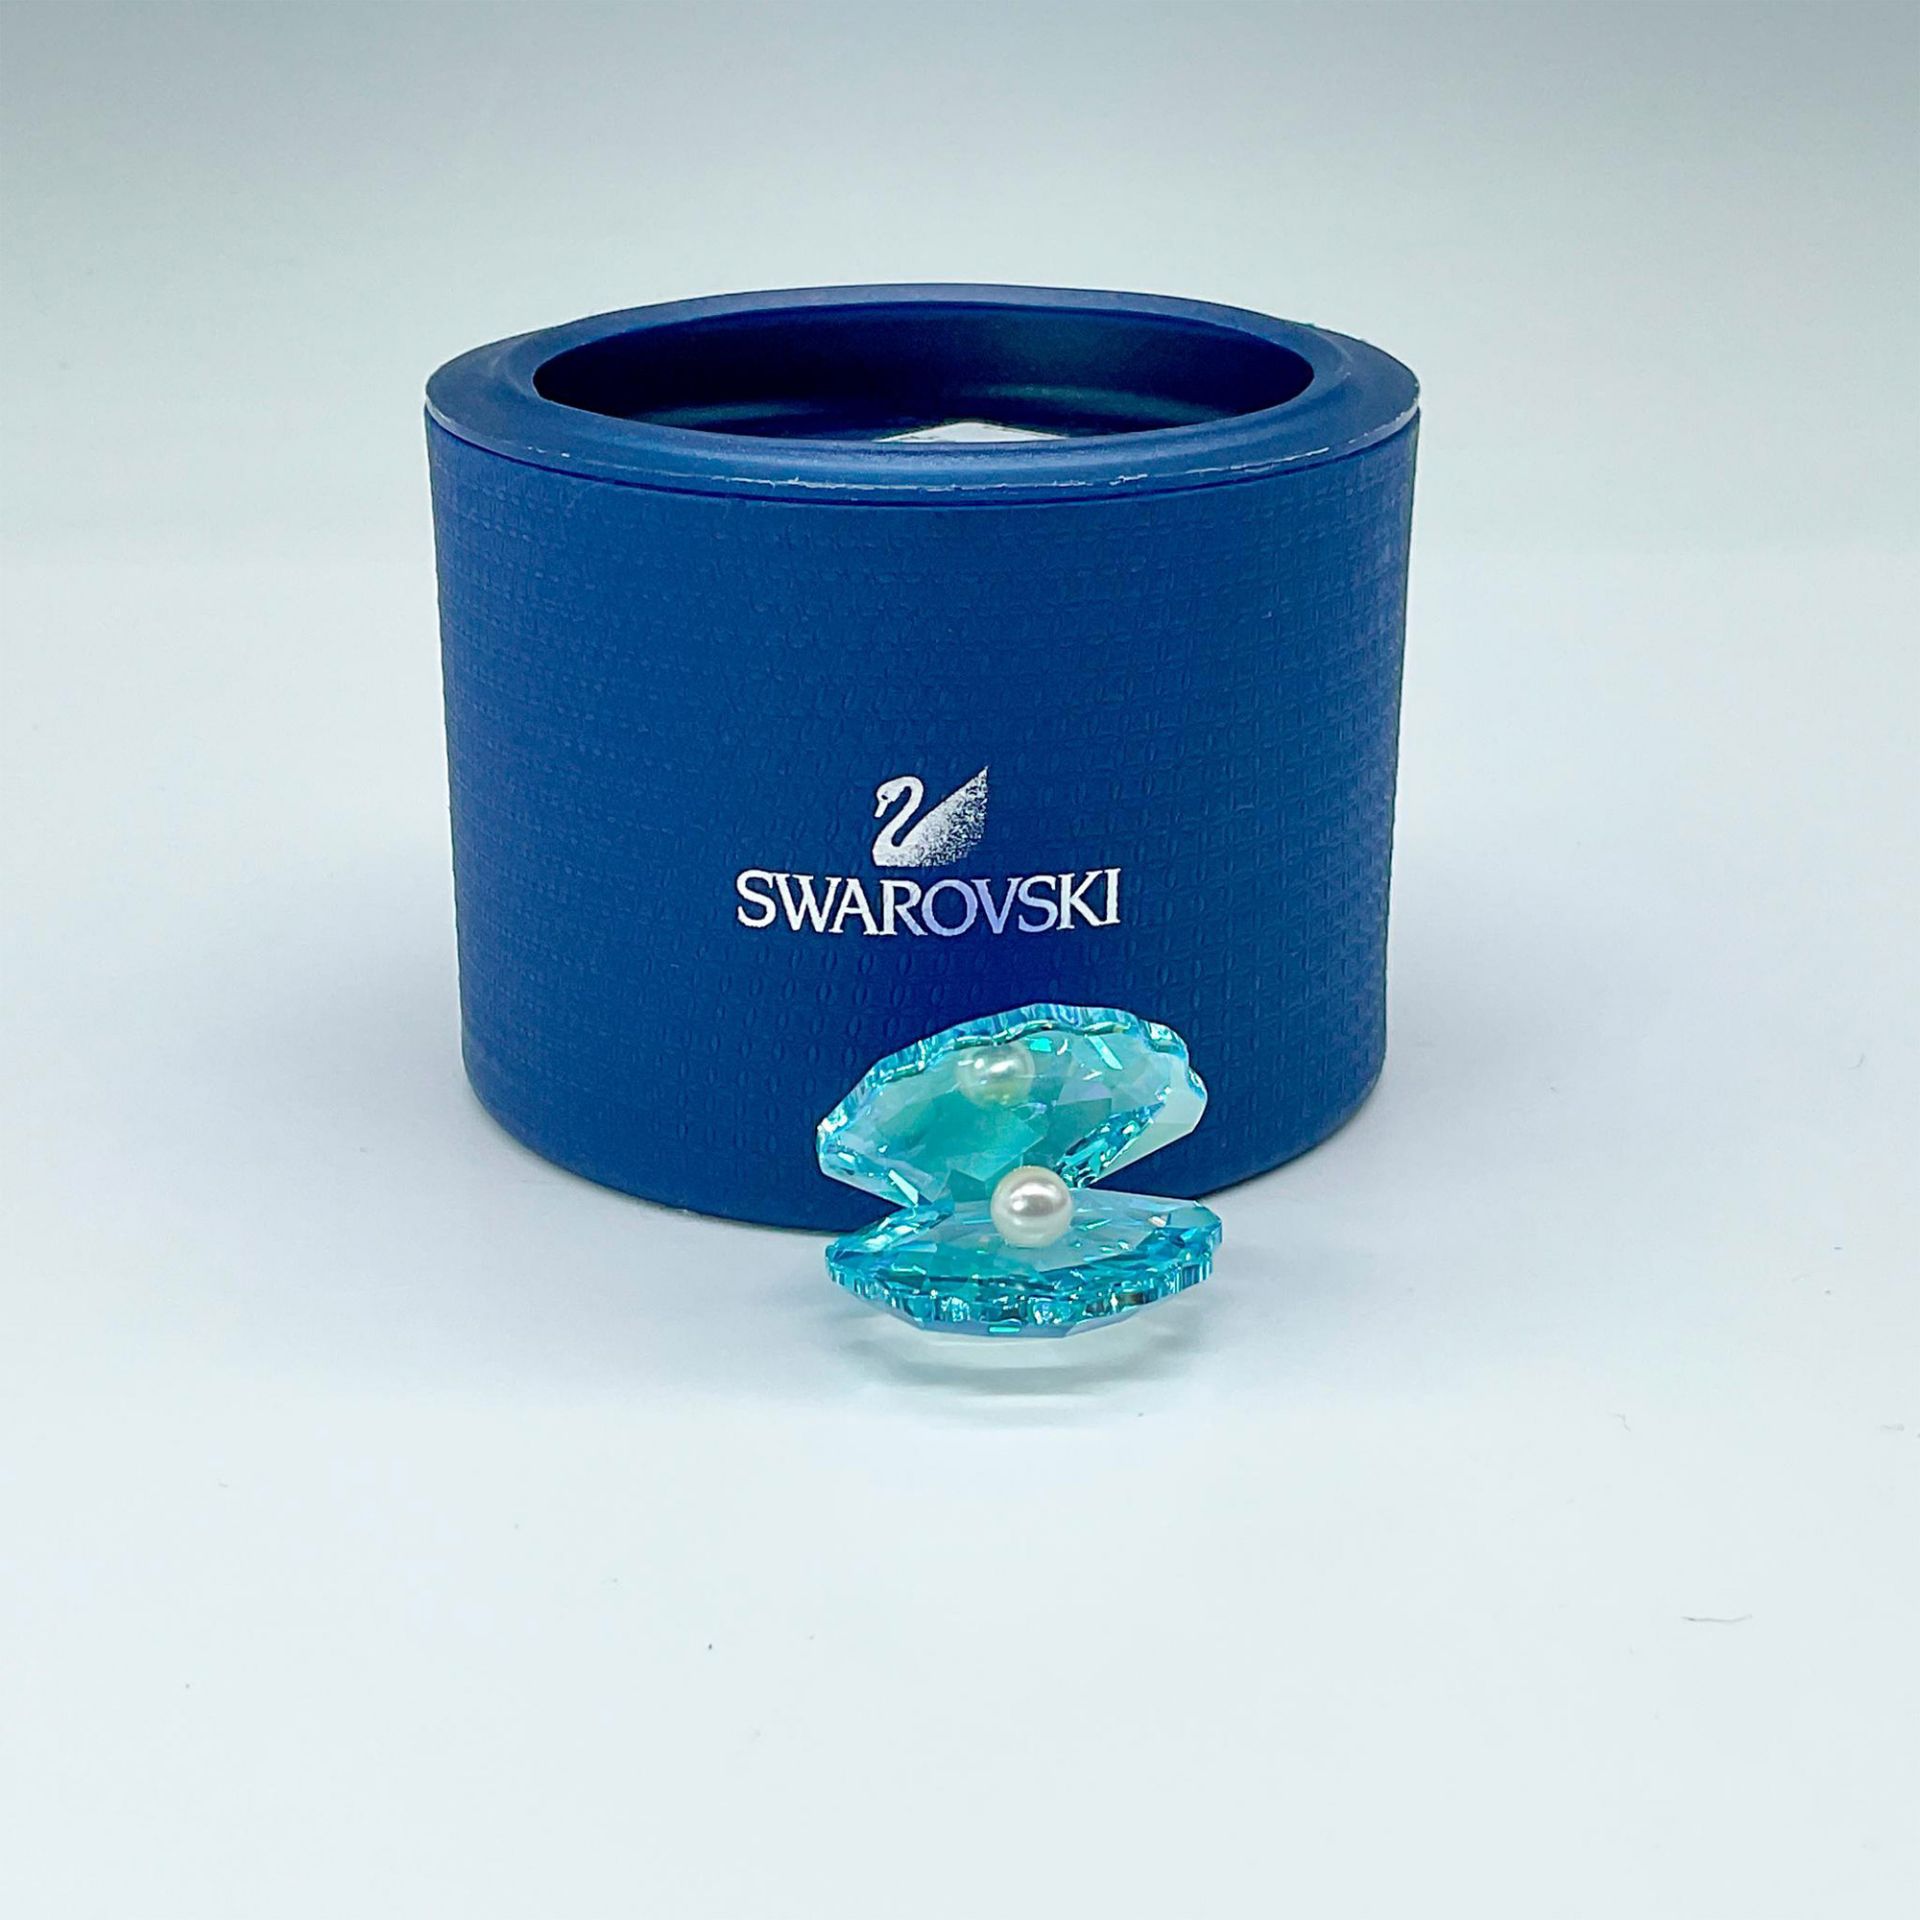 Swarovski Crystal Figurine, Small Blue Shell with Pearl - Image 4 of 4